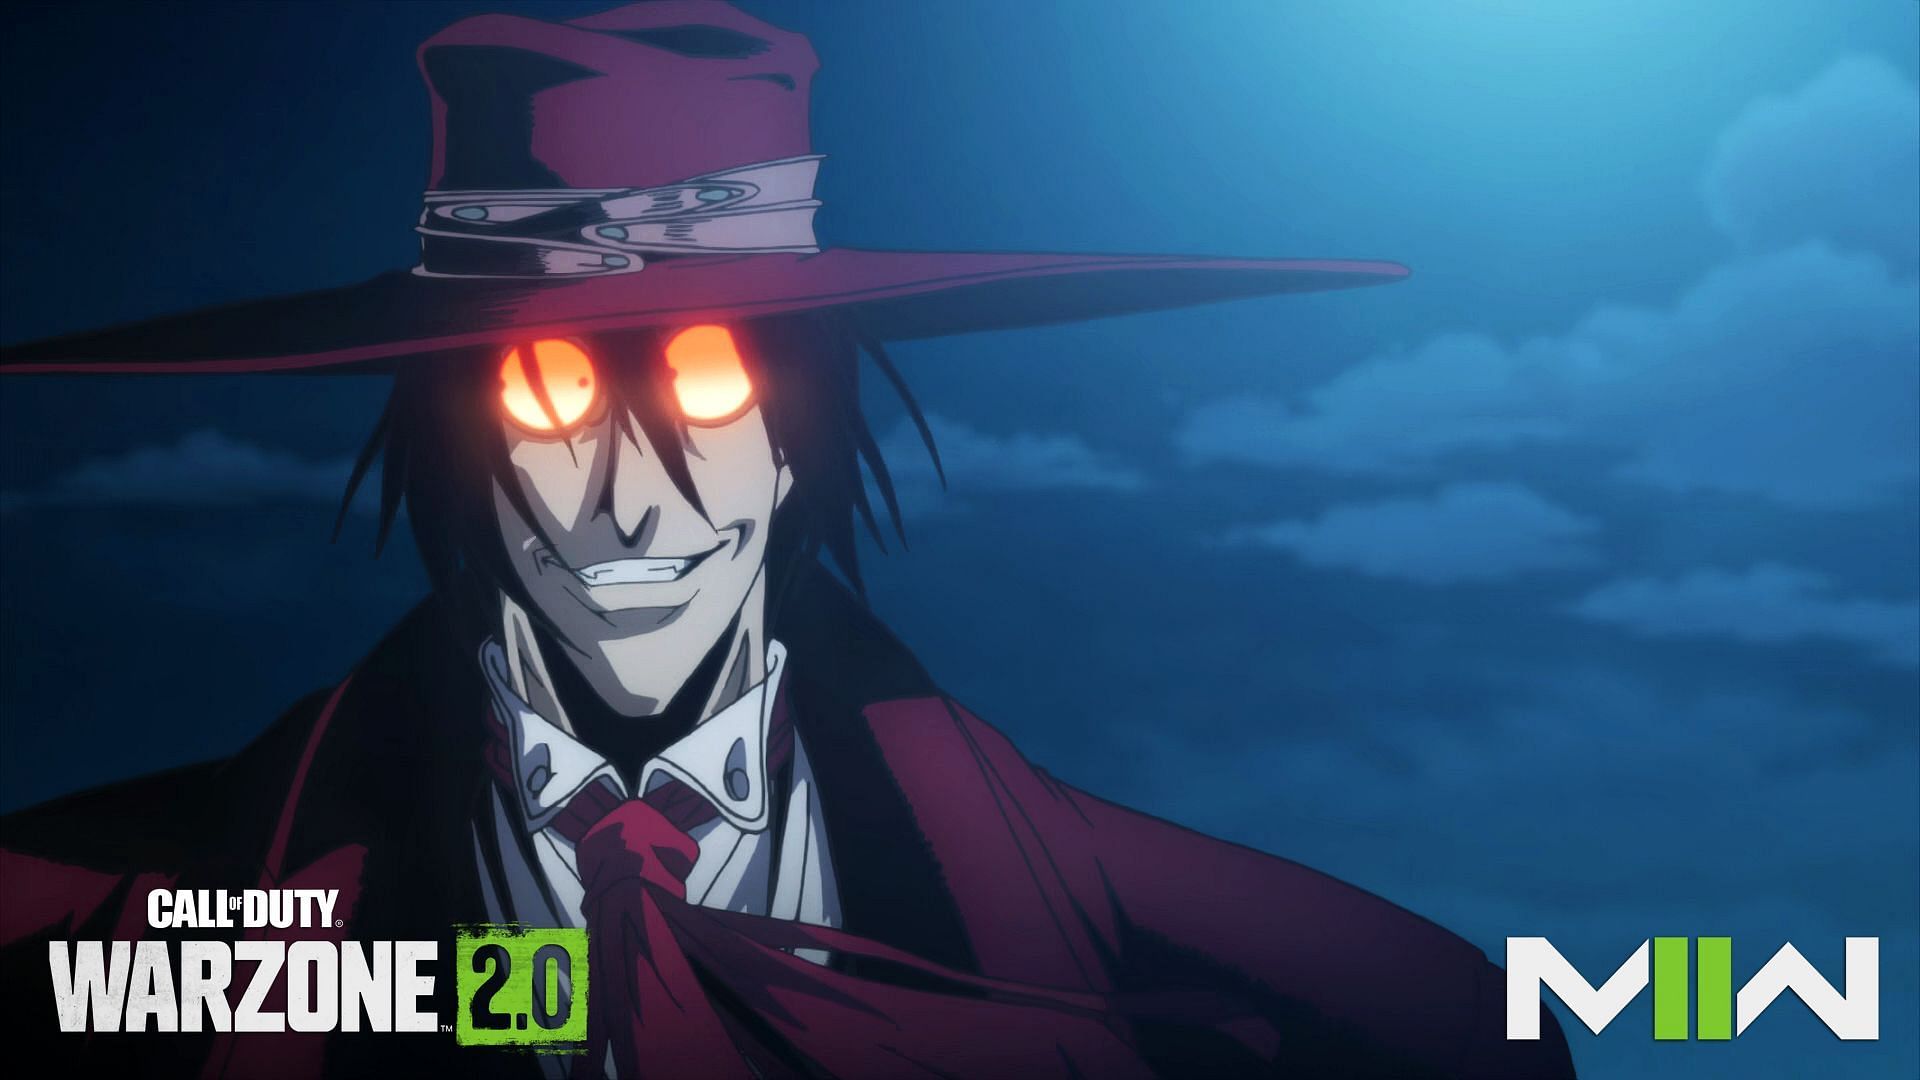 HD wallpaper: male anime character collage, Hellsing, Alucard (Hellsing),  one person